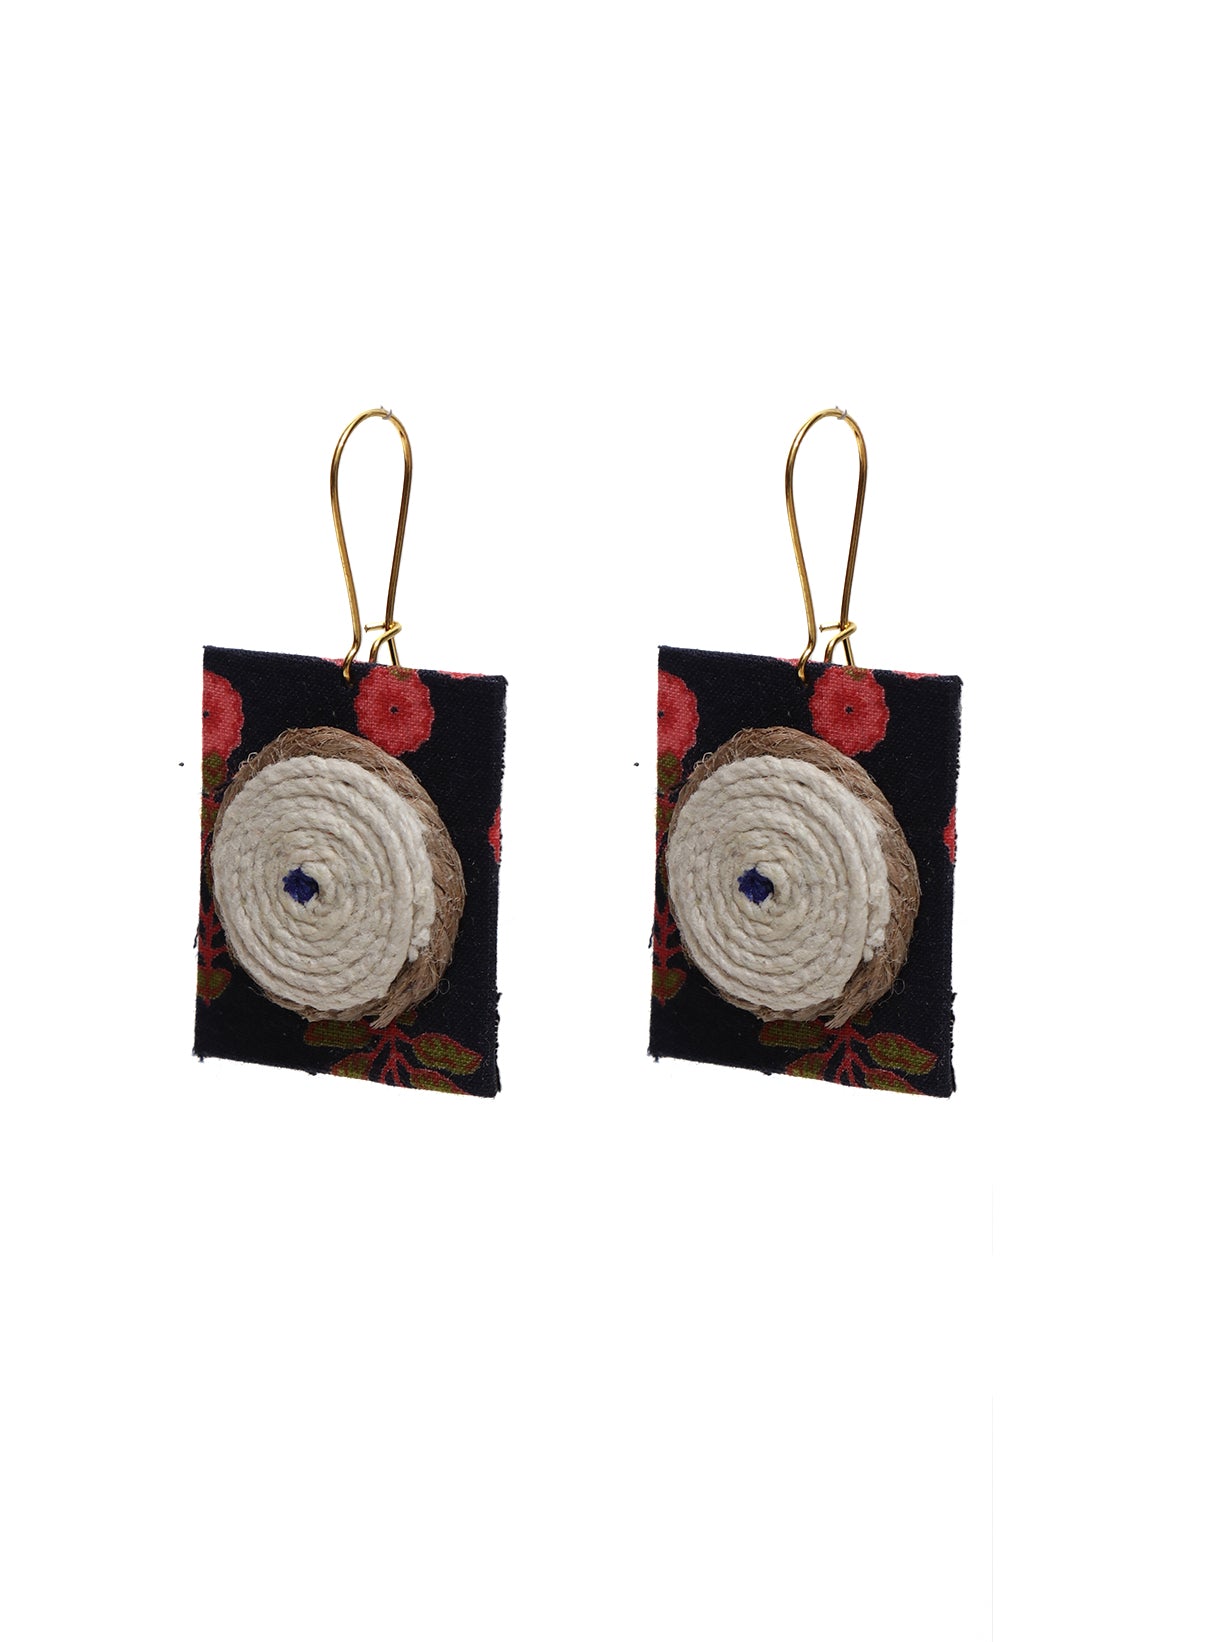 Wooden Beads, Fabric and Jute Work Necklace Set with Thread Closure